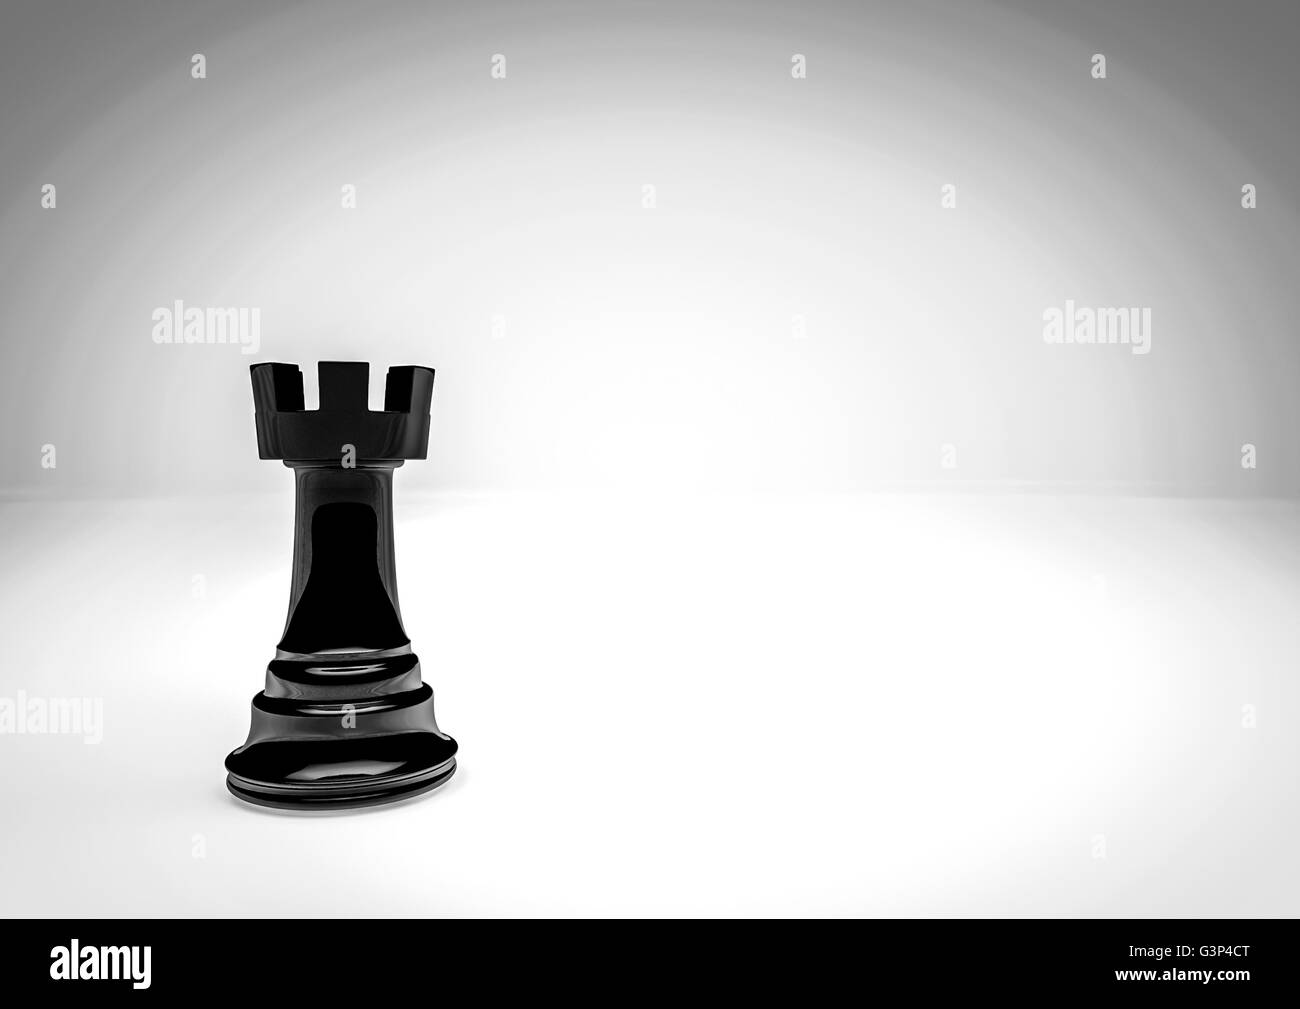 Illustration Abstract Chess Rook Pieces Stock Vector by ©AlexanderZam  209389496